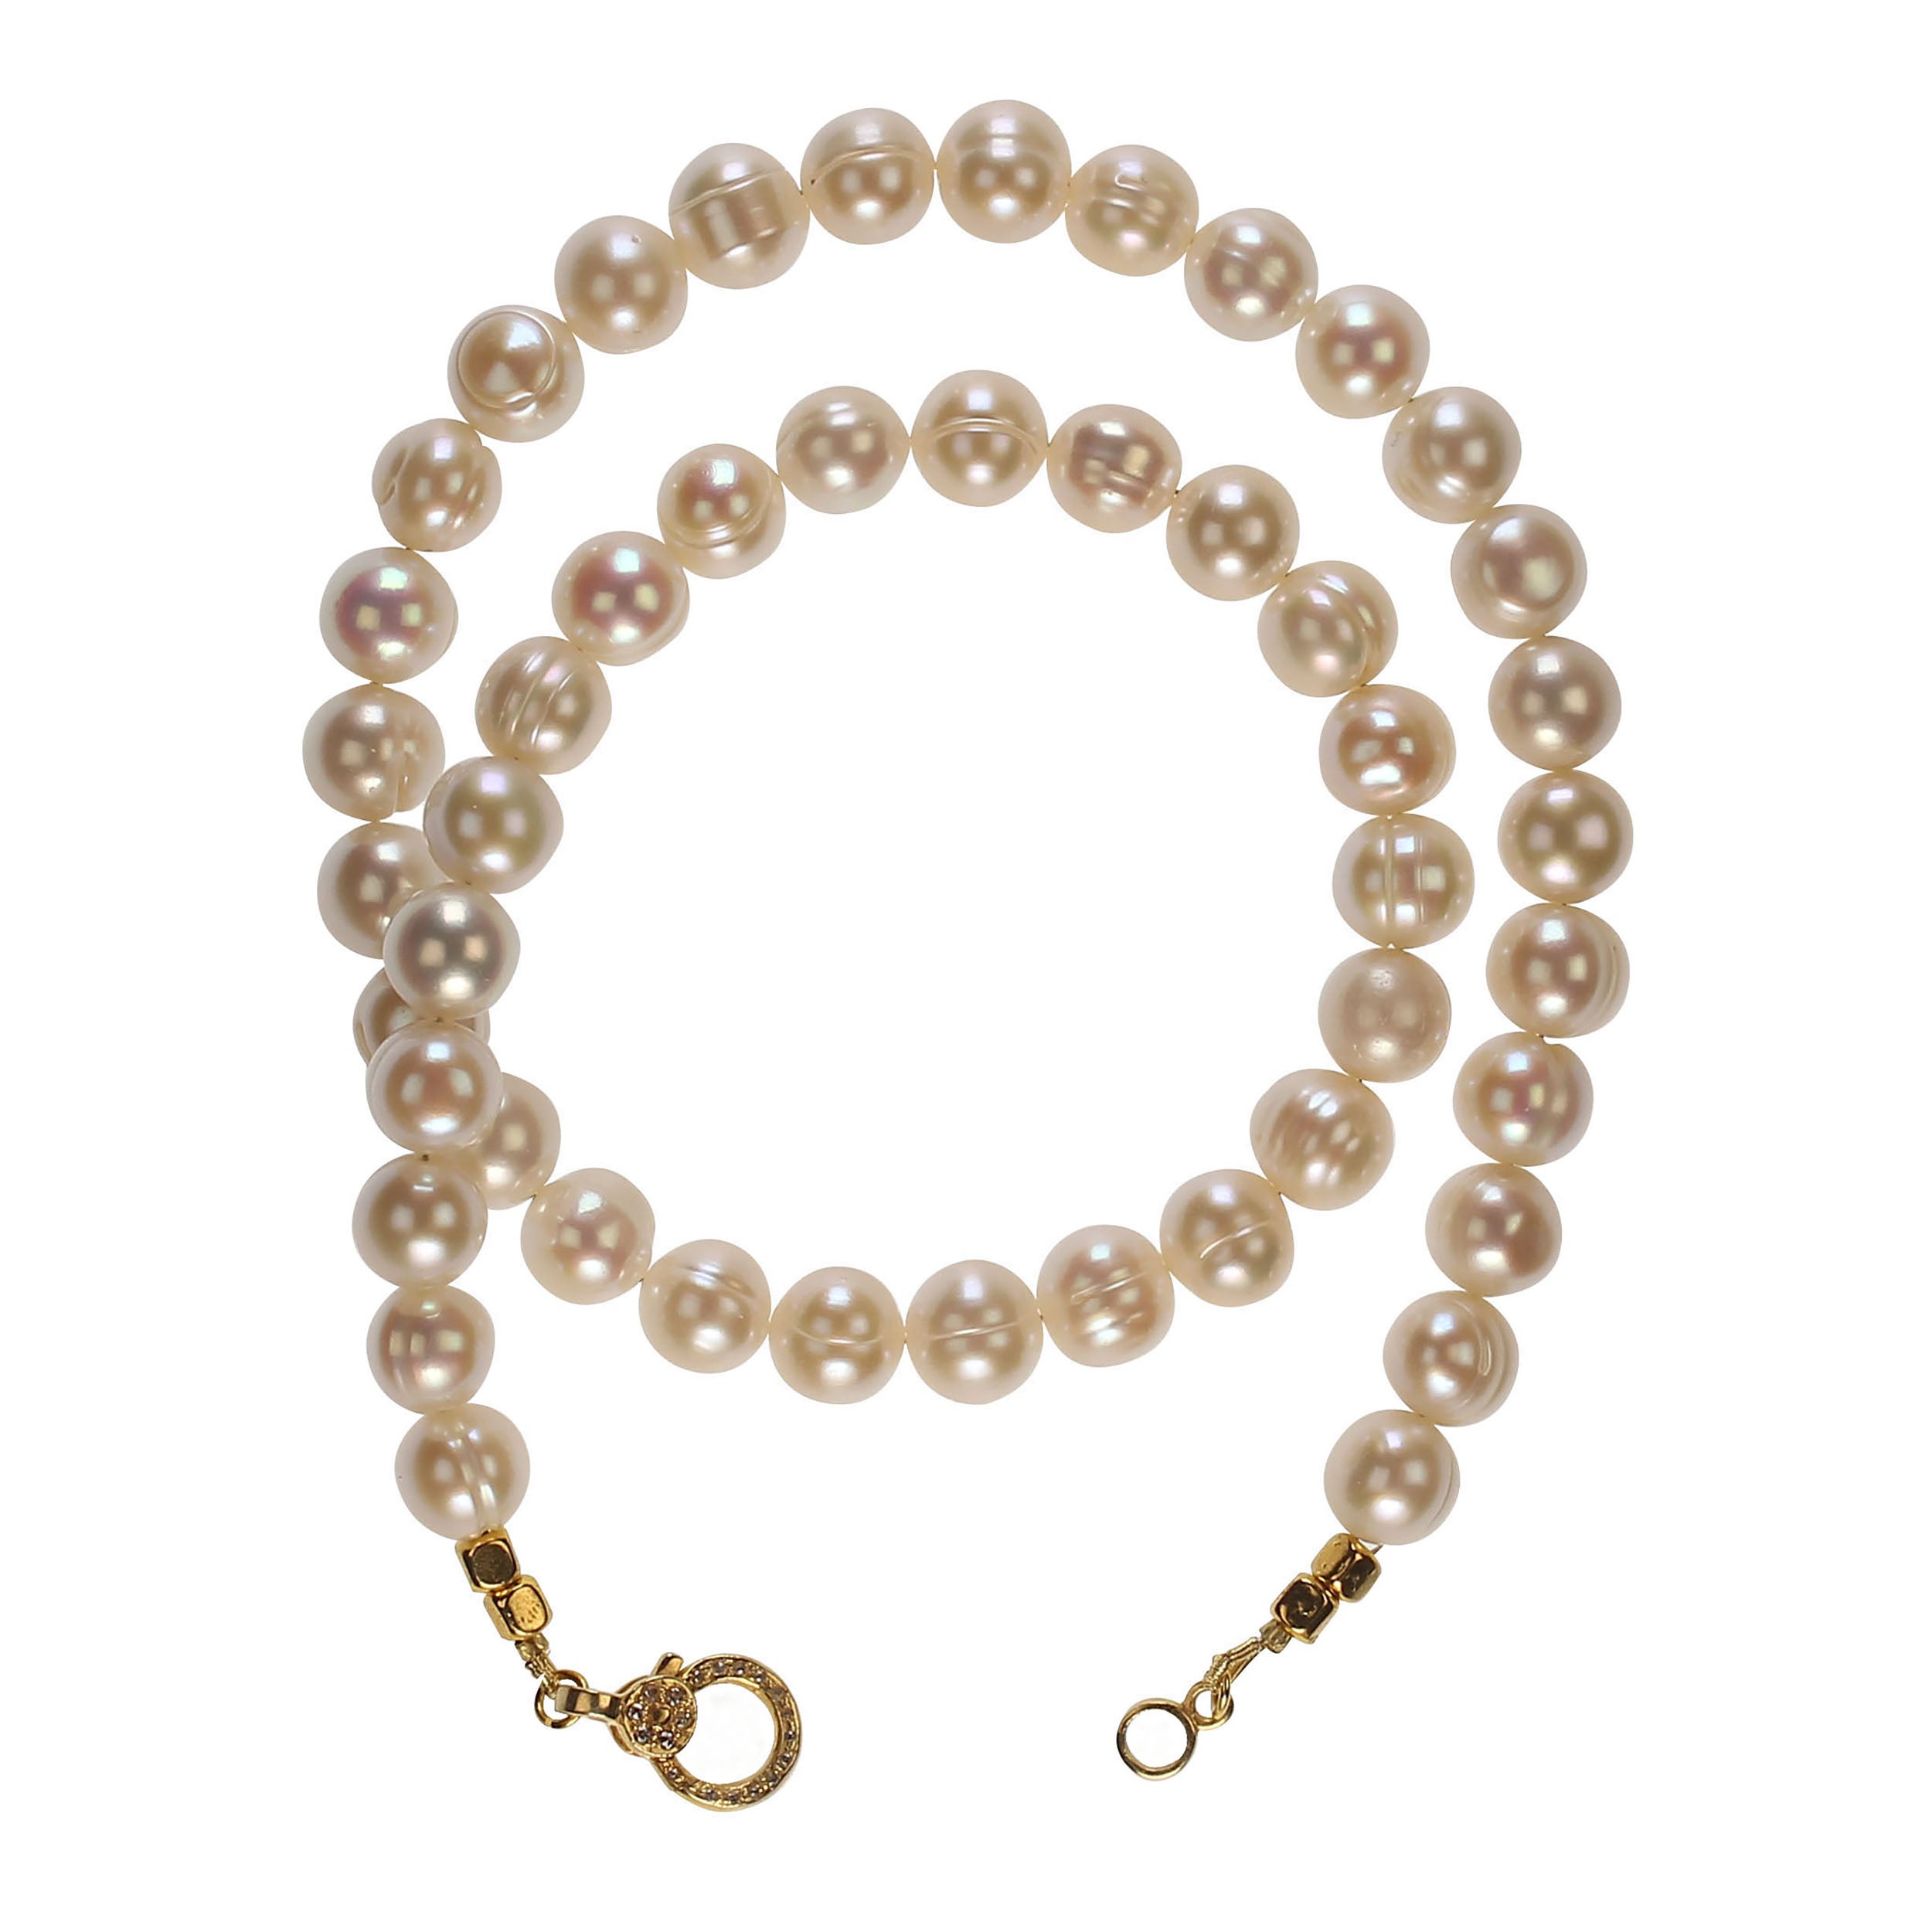 Perfect gift for Valentine's Day.  This elegant 17-inch white pearl necklace is just as perfect a gift today as it was 100 years ago and will be 100 years from now.  This gorgeous necklace is secured with a diamond chip studded vermeil lobster claw